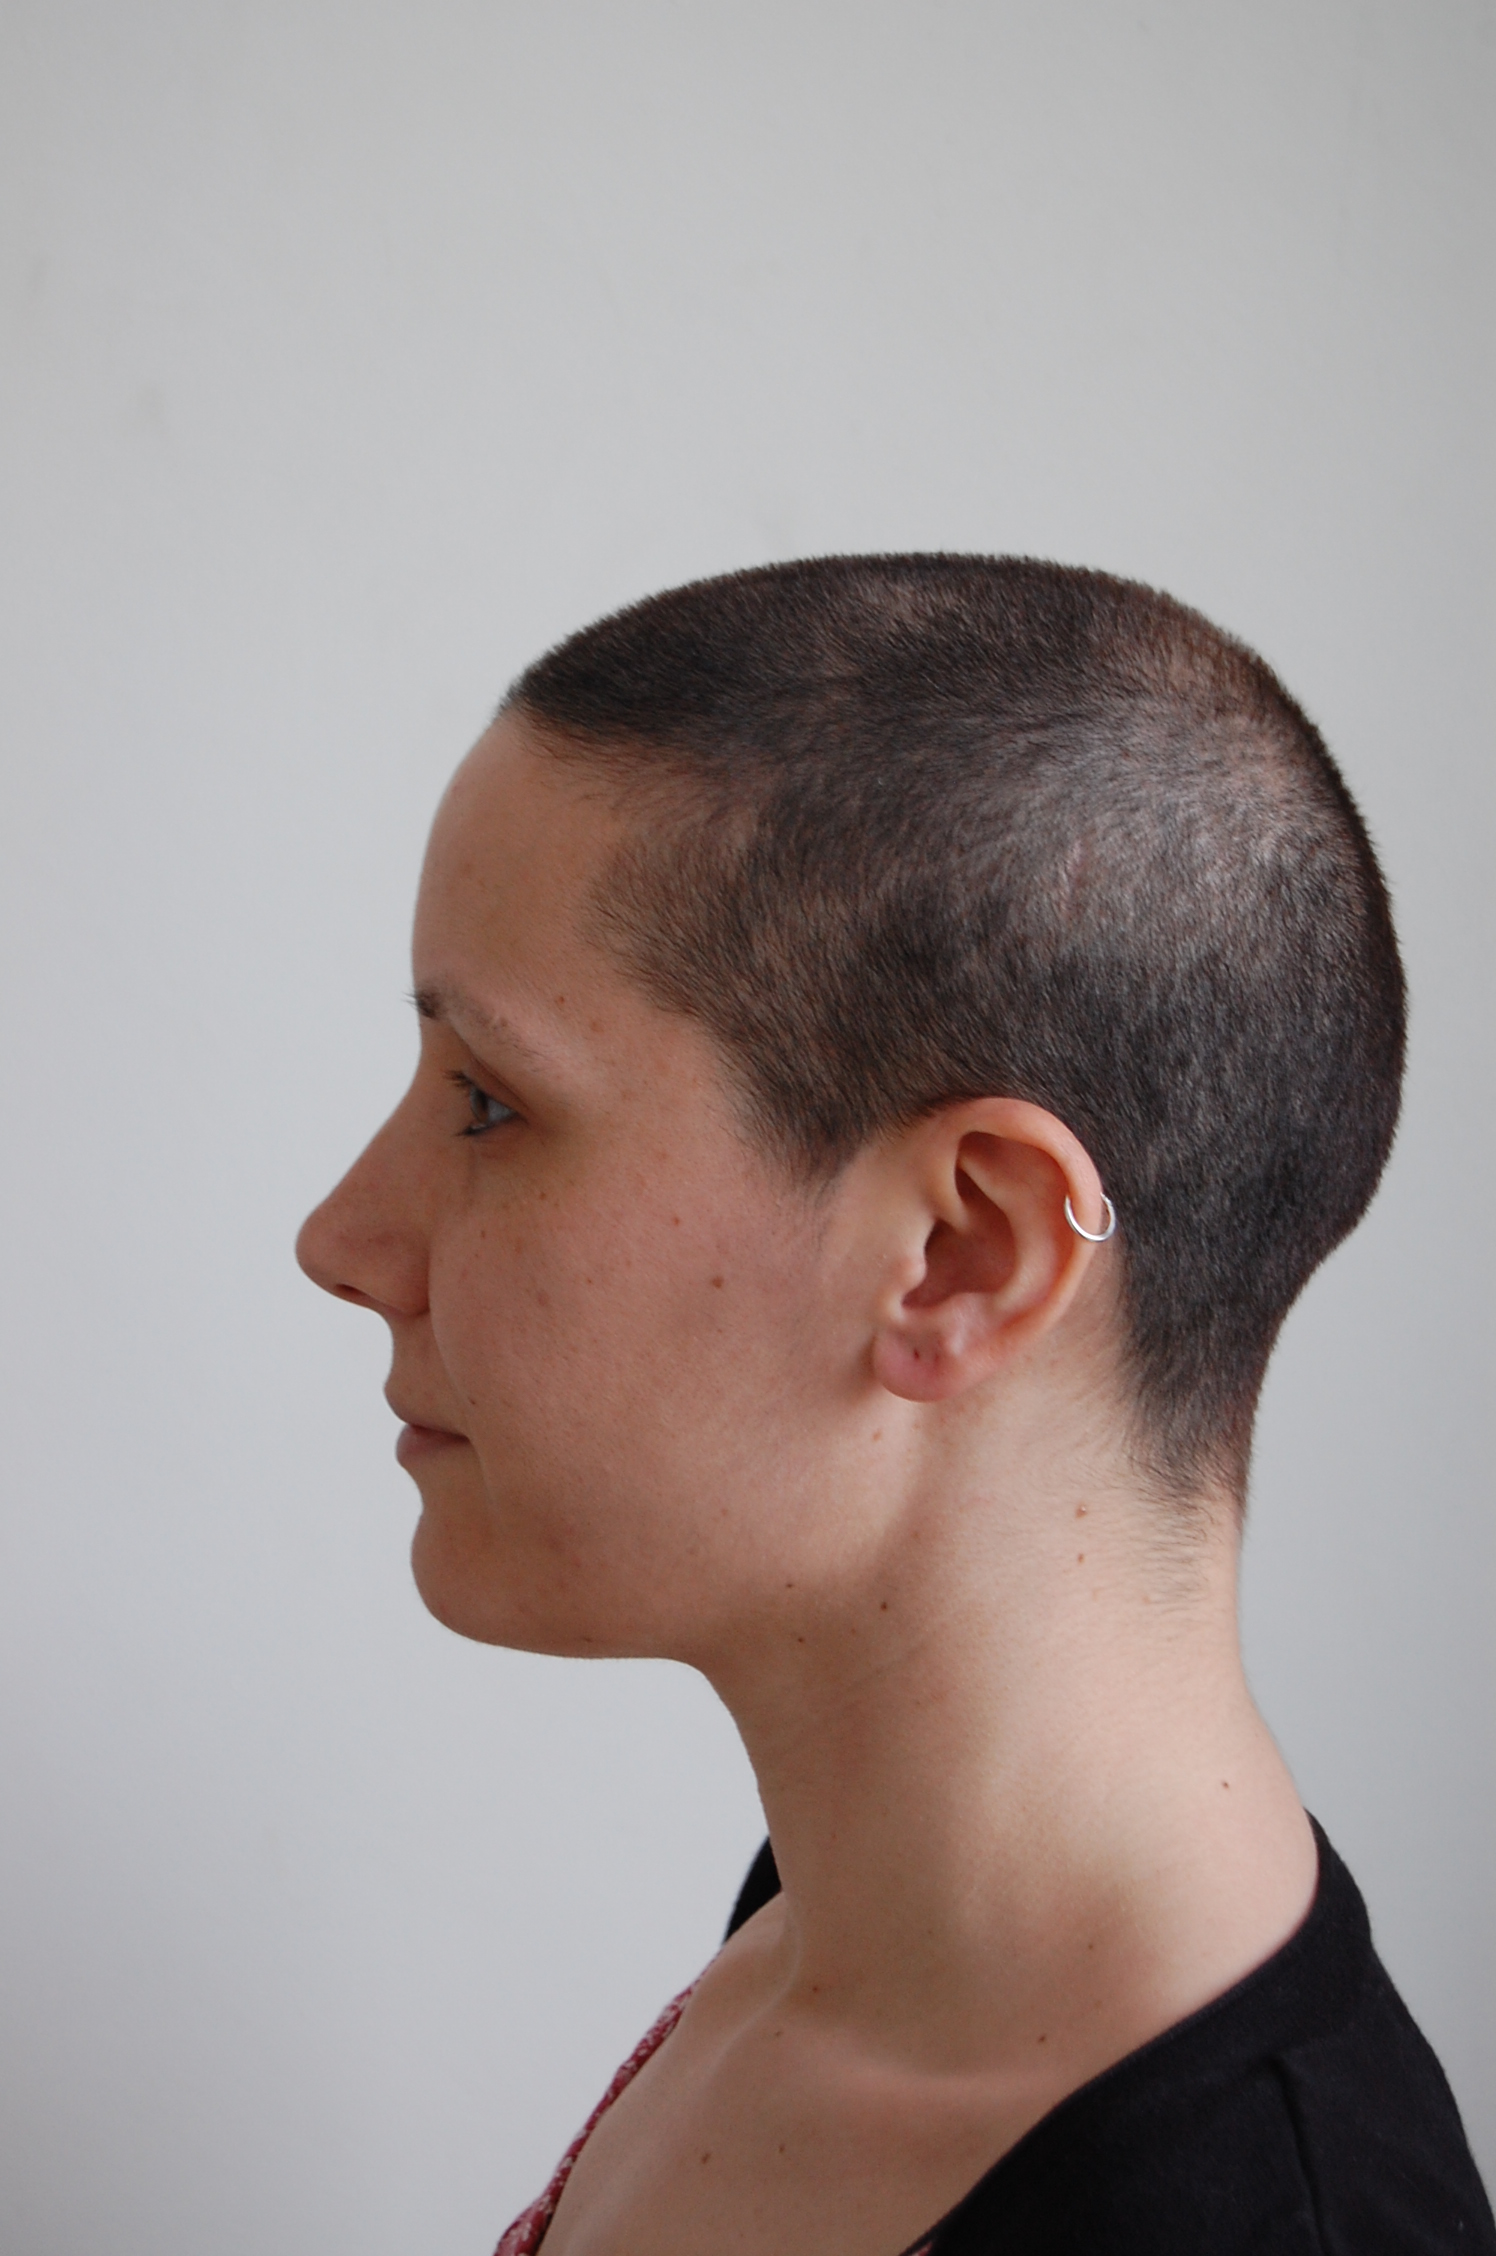 Week 16 Hair Growth After Chemo